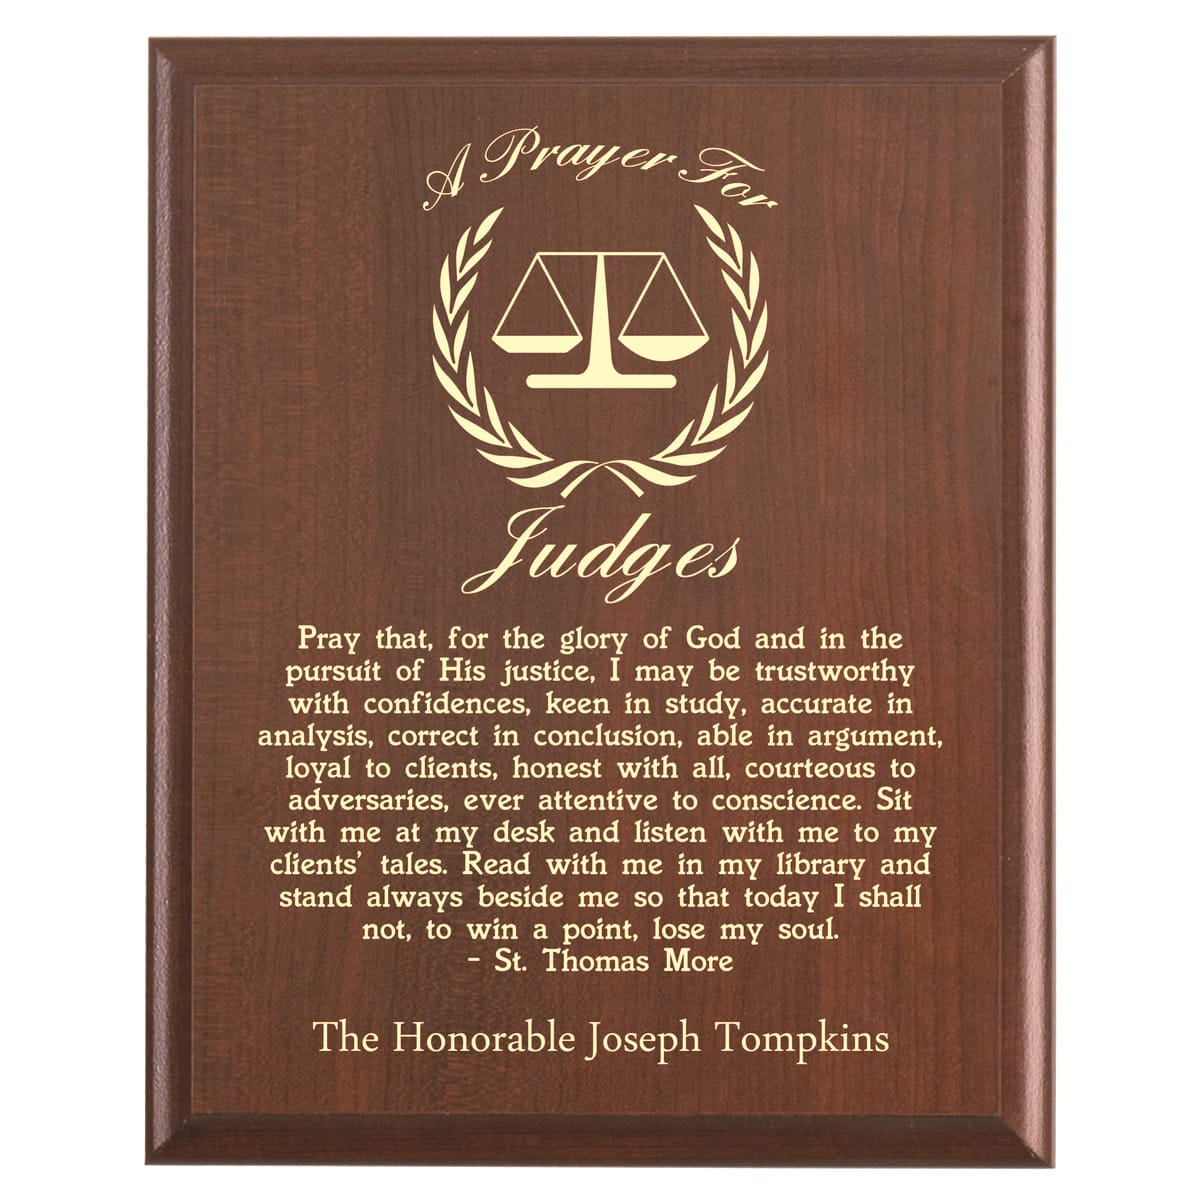 Plaque photo: Judge Prayer Plaque design with free personalization. Wood style finish with customized text.